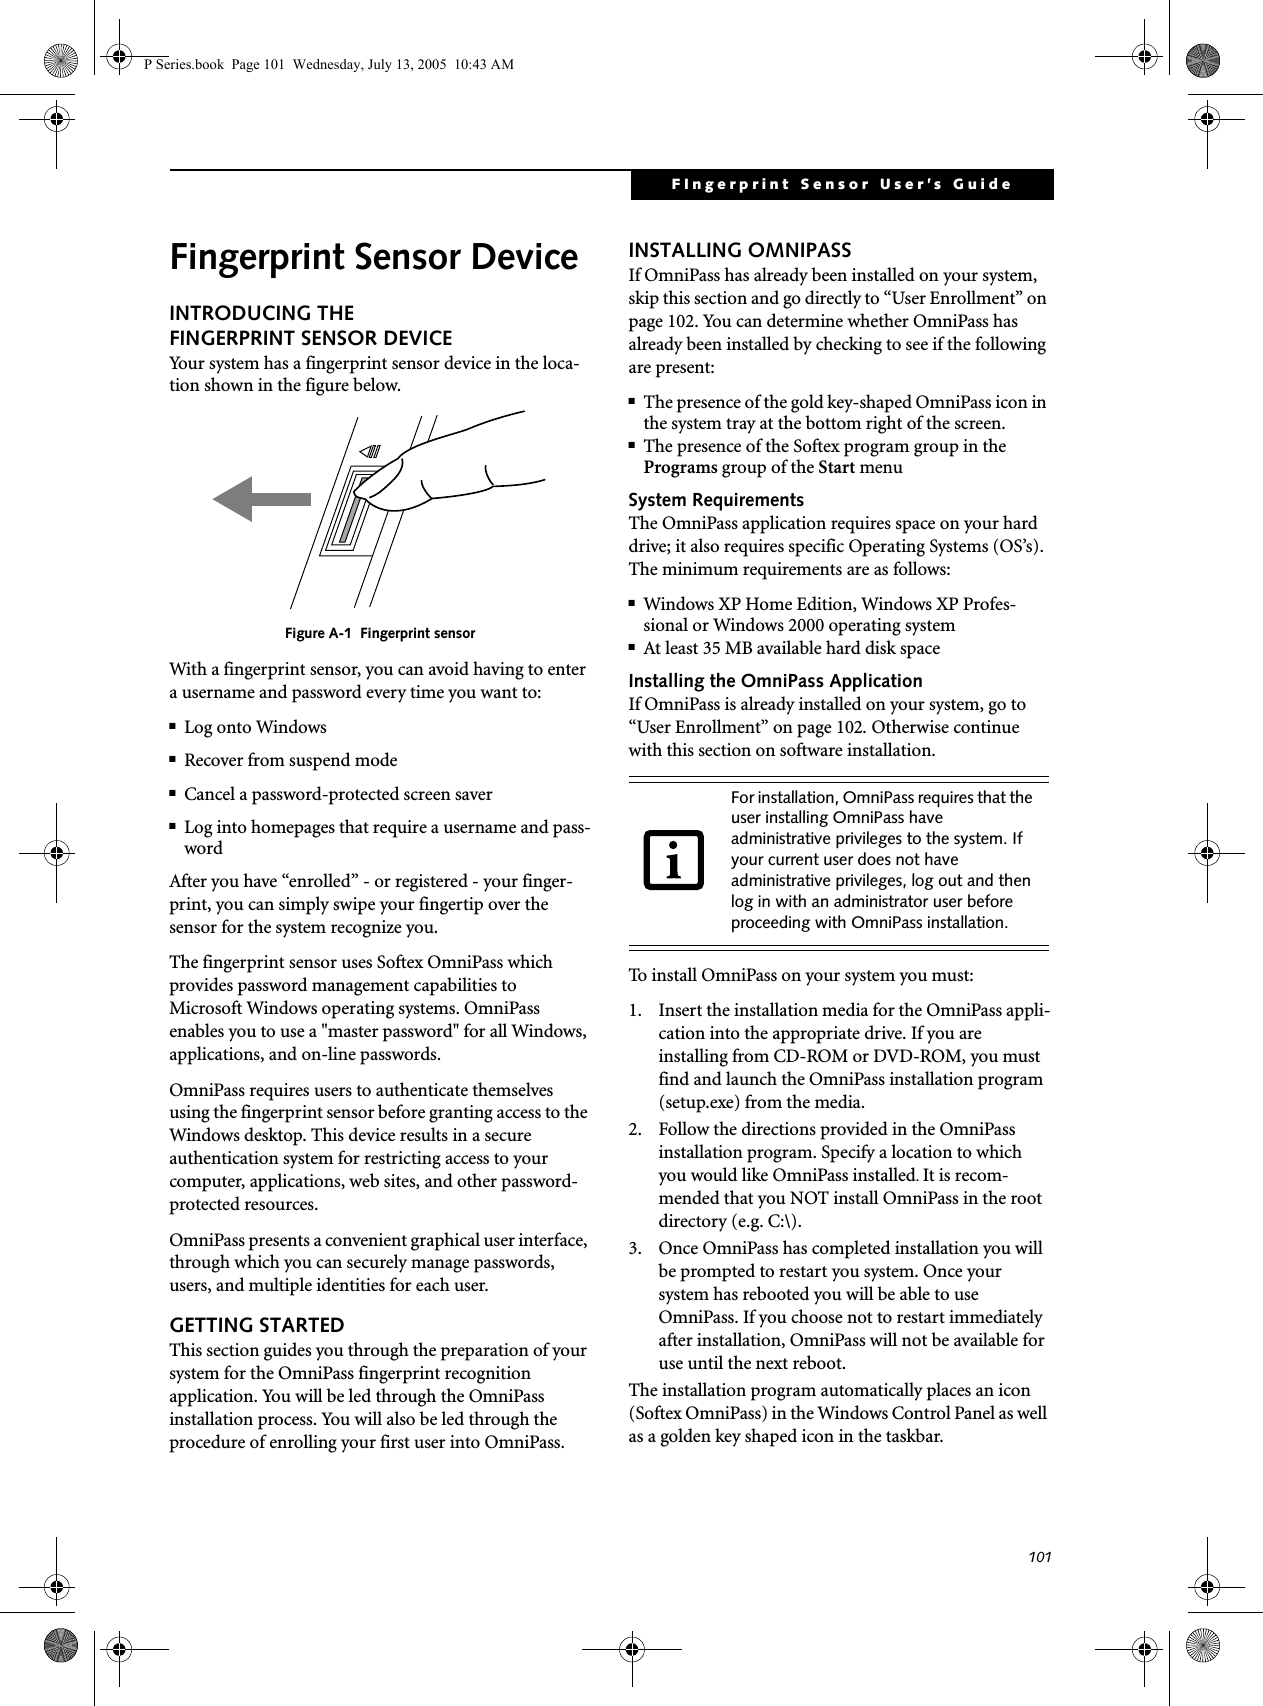 101FIngerprint Sensor User’s Guide Fingerprint Sensor DeviceINTRODUCING THE FINGERPRINT SENSOR DEVICEYour system has a fingerprint sensor device in the loca-tion shown in the figure below. Figure A-1  Fingerprint sensorWith a fingerprint sensor, you can avoid having to enter a username and password every time you want to:■Log onto Windows■Recover from suspend mode■Cancel a password-protected screen saver■Log into homepages that require a username and pass-wordAfter you have “enrolled” - or registered - your finger-print, you can simply swipe your fingertip over the sensor for the system recognize you. The fingerprint sensor uses Softex OmniPass which provides password management capabilities to Microsoft Windows operating systems. OmniPass enables you to use a &quot;master password&quot; for all Windows, applications, and on-line passwords. OmniPass requires users to authenticate themselves using the fingerprint sensor before granting access to the Windows desktop. This device results in a secure authentication system for restricting access to your computer, applications, web sites, and other password-protected resources.OmniPass presents a convenient graphical user interface, through which you can securely manage passwords, users, and multiple identities for each user.GETTING STARTEDThis section guides you through the preparation of your system for the OmniPass fingerprint recognition application. You will be led through the OmniPass installation process. You will also be led through the procedure of enrolling your first user into OmniPass. INSTALLING OMNIPASSIf OmniPass has already been installed on your system, skip this section and go directly to “User Enrollment” on page 102. You can determine whether OmniPass has already been installed by checking to see if the following are present:■The presence of the gold key-shaped OmniPass icon in the system tray at the bottom right of the screen.■The presence of the Softex program group in the Programs group of the Start menuSystem RequirementsThe OmniPass application requires space on your hard drive; it also requires specific Operating Systems (OS’s). The minimum requirements are as follows:■Windows XP Home Edition, Windows XP Profes-sional or Windows 2000 operating system■At least 35 MB available hard disk spaceInstalling the OmniPass ApplicationIf OmniPass is already installed on your system, go to “User Enrollment” on page 102. Otherwise continue with this section on software installation.To install OmniPass on your system you must:1.  Insert the installation media for the OmniPass appli-cation into the appropriate drive. If you are installing from CD-ROM or DVD-ROM, you must find and launch the OmniPass installation program (setup.exe) from the media.2.  Follow the directions provided in the OmniPass installation program. Specify a location to which you would like OmniPass installed. It is recom-mended that you NOT install OmniPass in the root directory (e.g. C:\). 3.  Once OmniPass has completed installation you will be prompted to restart you system. Once your system has rebooted you will be able to use OmniPass. If you choose not to restart immediately after installation, OmniPass will not be available for use until the next reboot.The installation program automatically places an icon (Softex OmniPass) in the Windows Control Panel as well as a golden key shaped icon in the taskbar. For installation, OmniPass requires that the user installing OmniPass have administrative privileges to the system. If your current user does not have administrative privileges, log out and then log in with an administrator user before proceeding with OmniPass installation.P Series.book  Page 101  Wednesday, July 13, 2005  10:43 AM